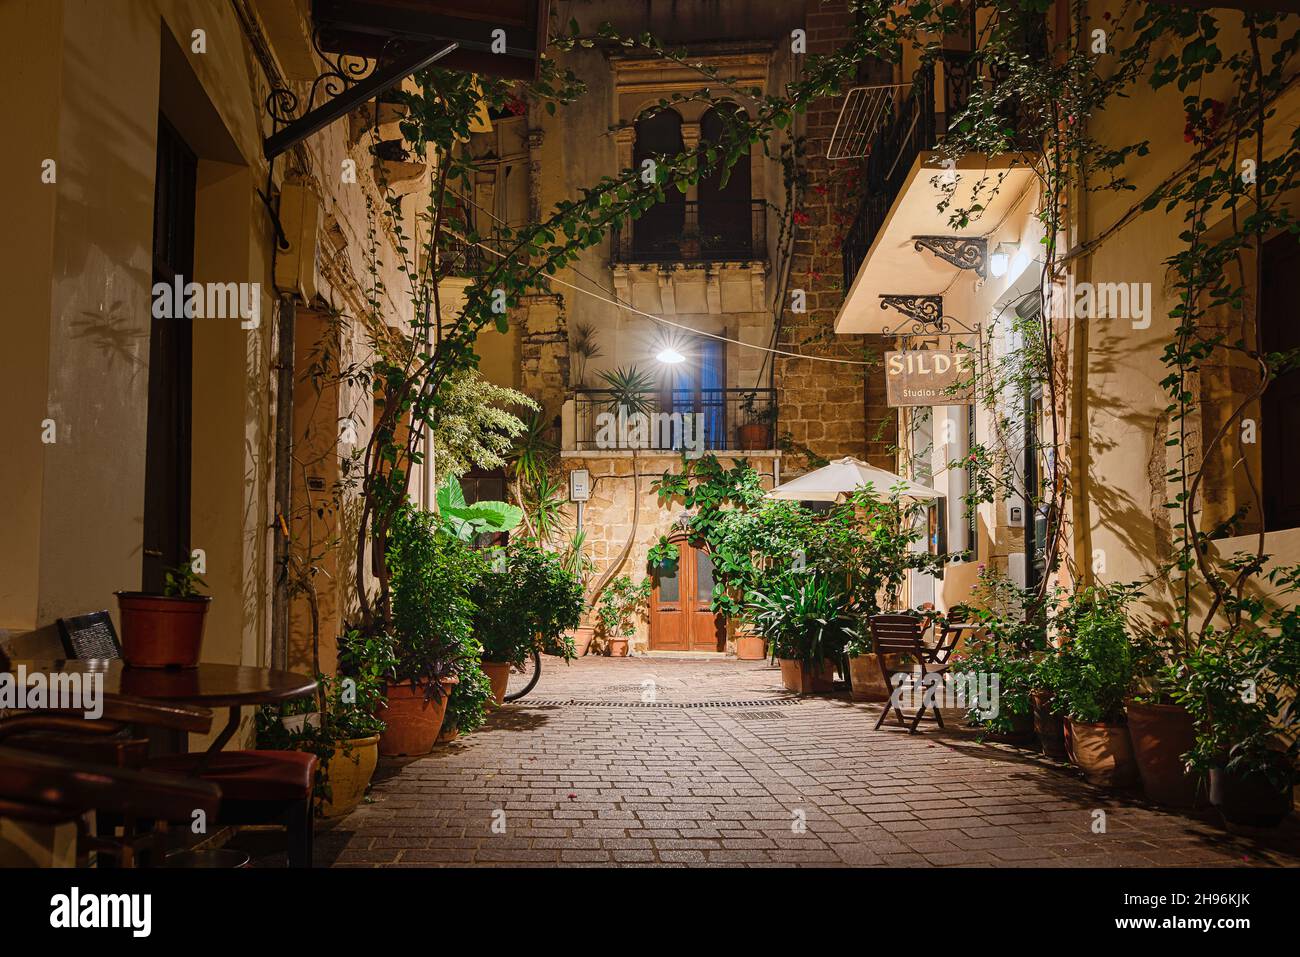 Streetlight illuminating a romantic alley in the old town of Chania, Crete, Greece, October 18, 2021 Stock Photo